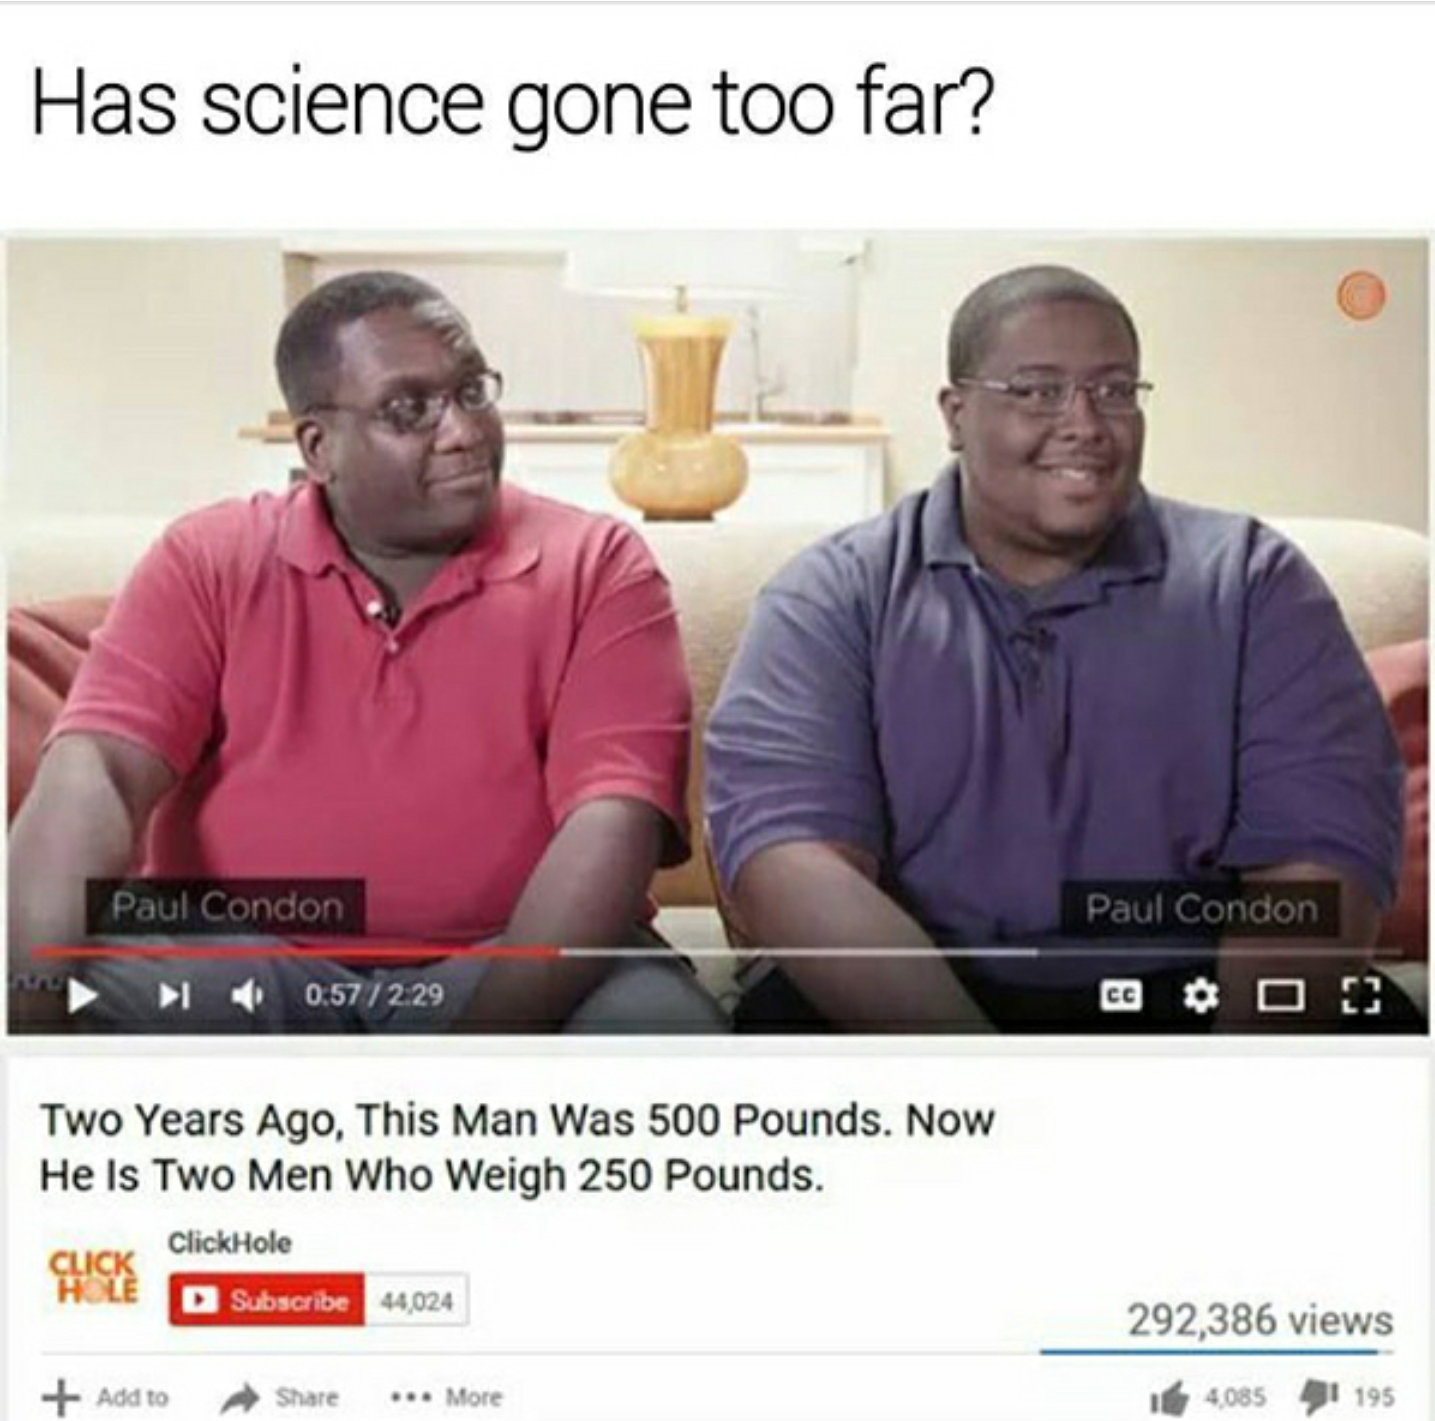 two years ago this man was 500 pounds - Has science gone too far? Paul Condon Paul Condon 0.57229 Two Years Ago, This Man Was 500 Pounds. Now He Is Two Men Who Weigh 250 Pounds. ClickHole Hd Subscribe 404 292,386 views 408 41195 At More